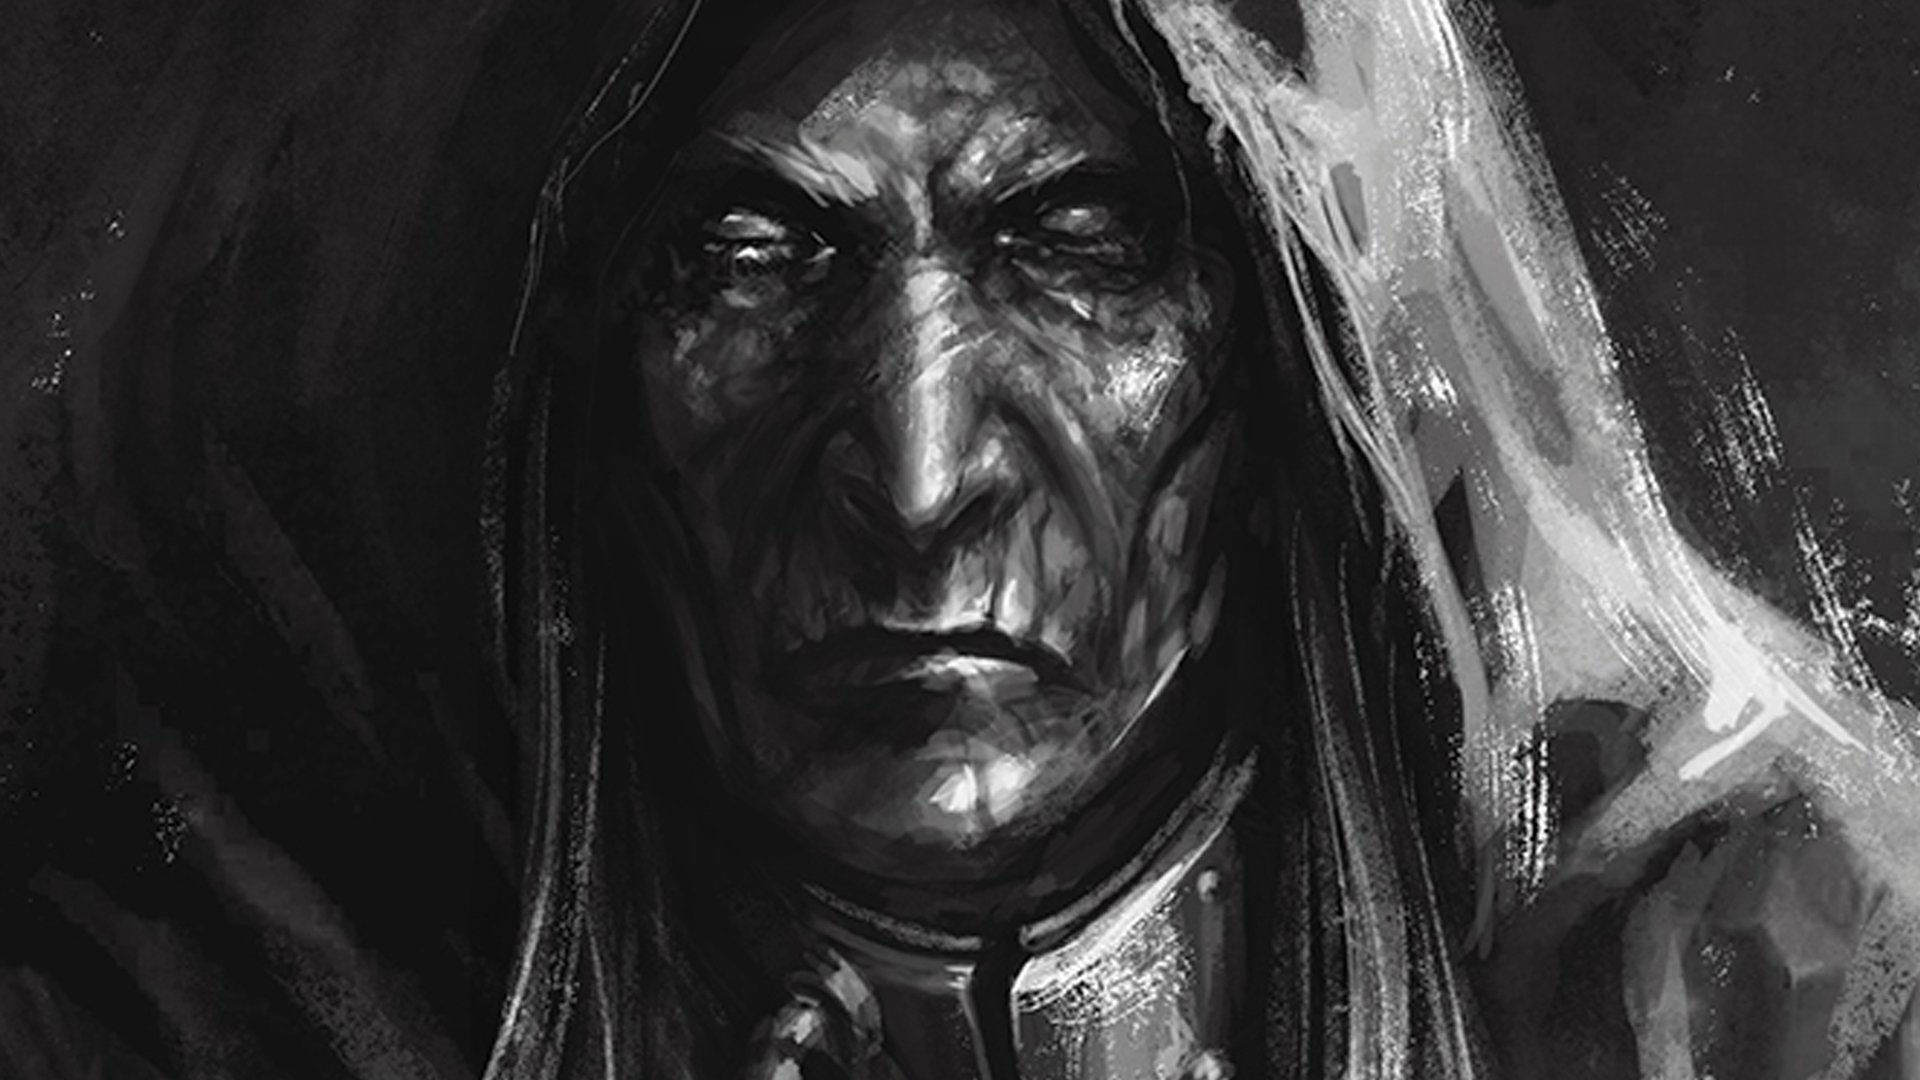 Warhammer 40k Malcador the Sigillite guide - Games Workshop artwork showing Malcador's hooded face, wreathed in shadow, with scars